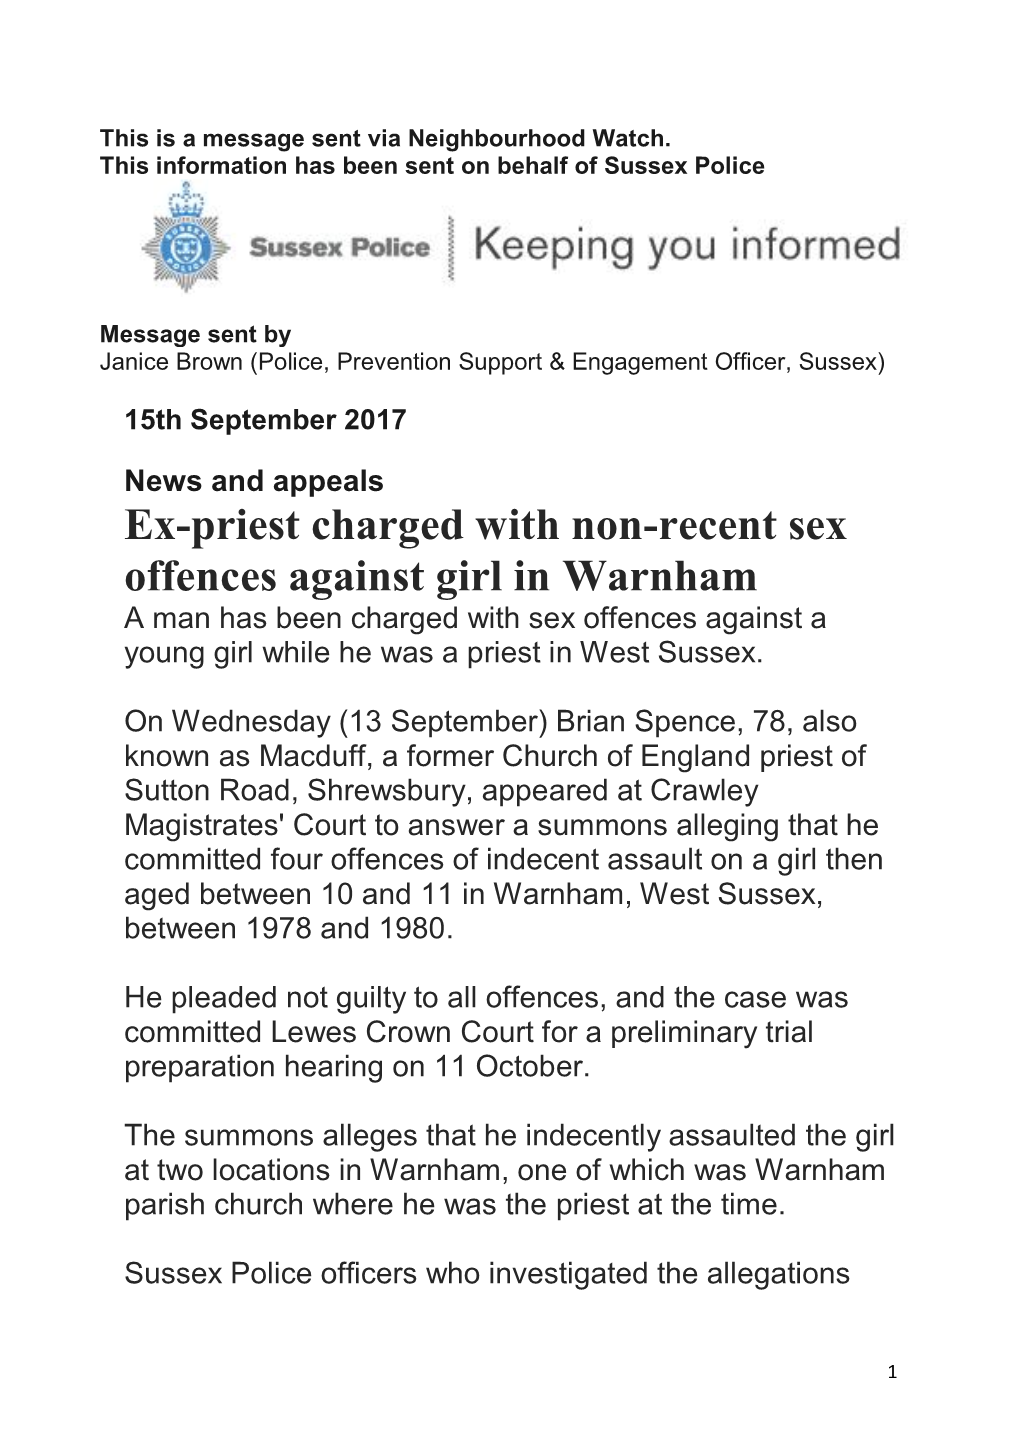 Ex-Priest Charged with Non-Recent Sex Offences Against Girl in Warnham